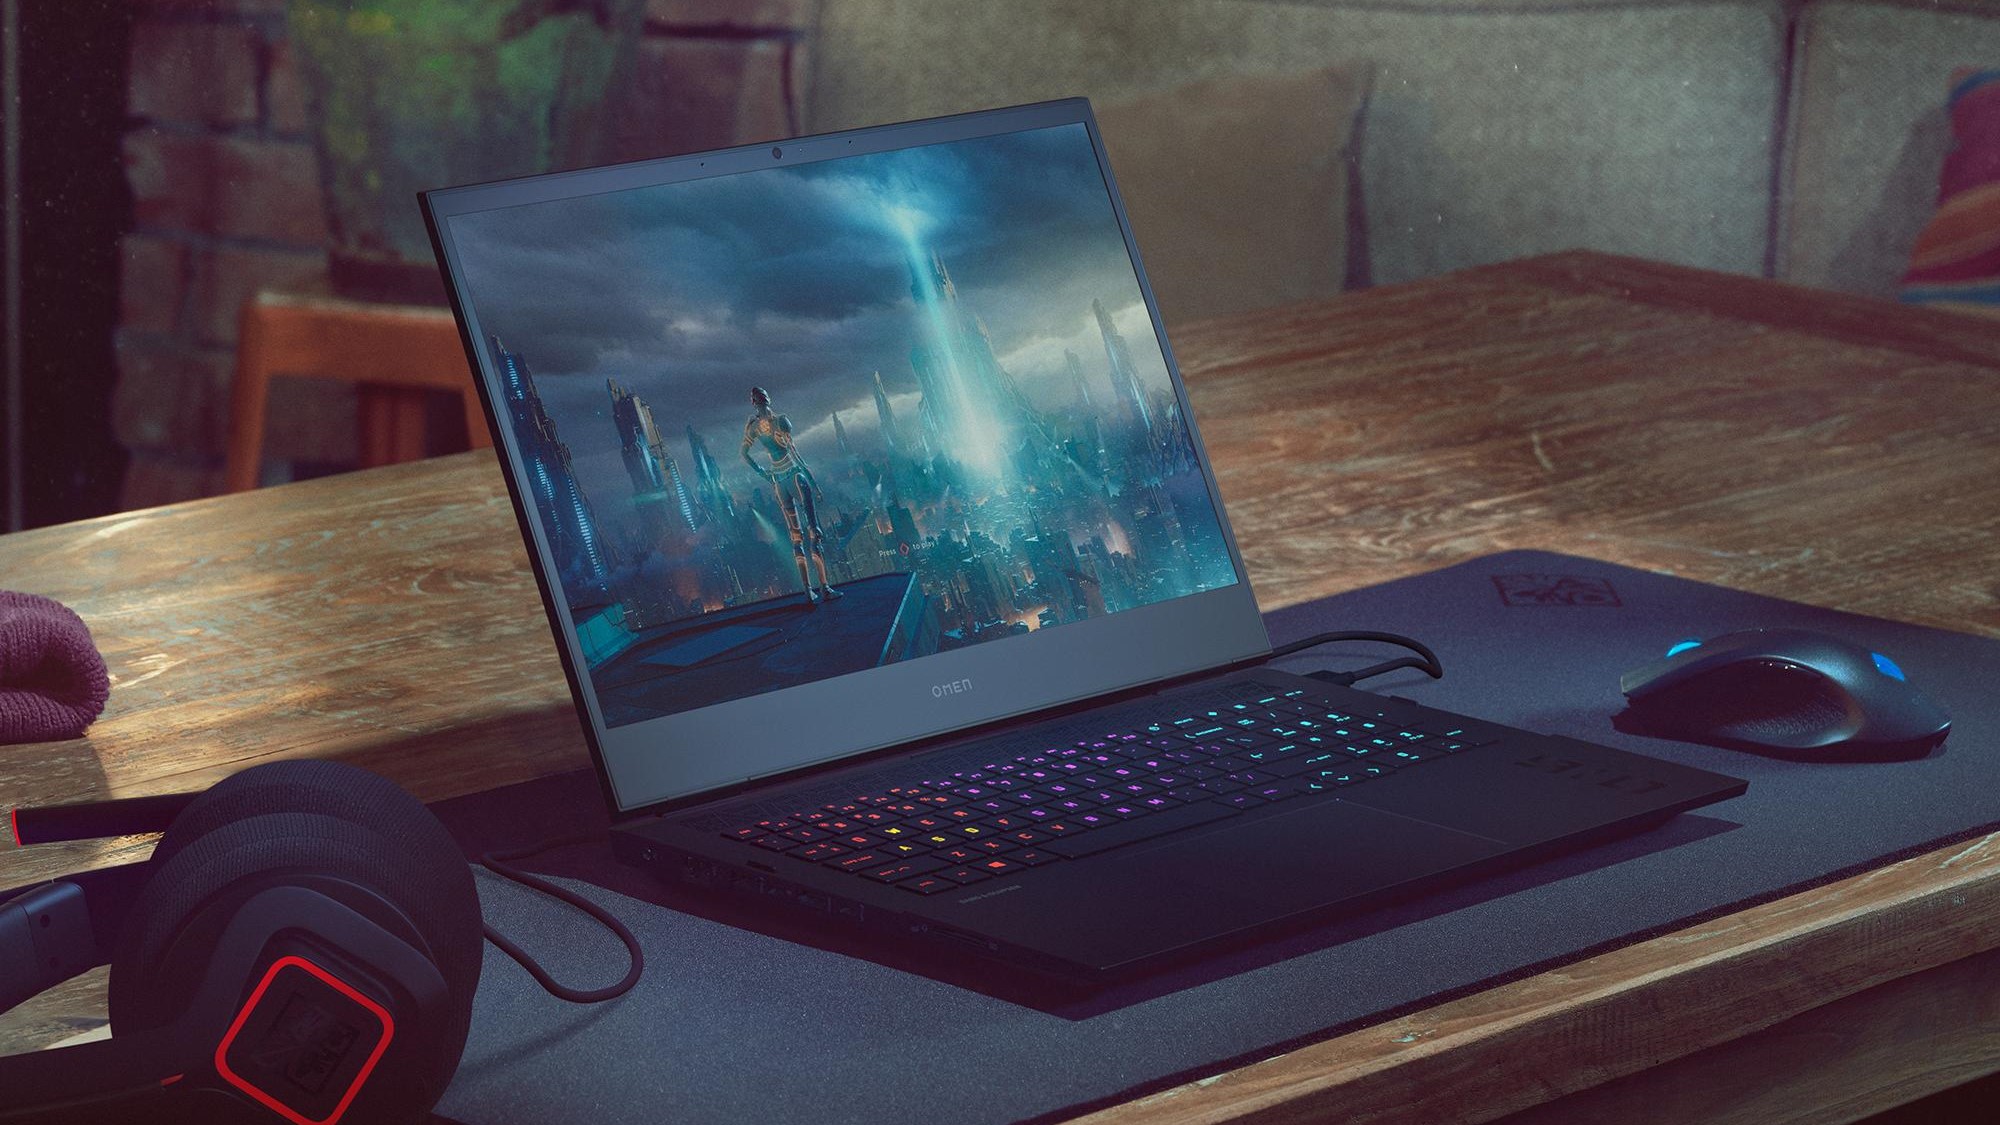  Intel gaming laptops and 13th Gen Intel Core desktop CPUs are a gift for PC gamers this holiday season 